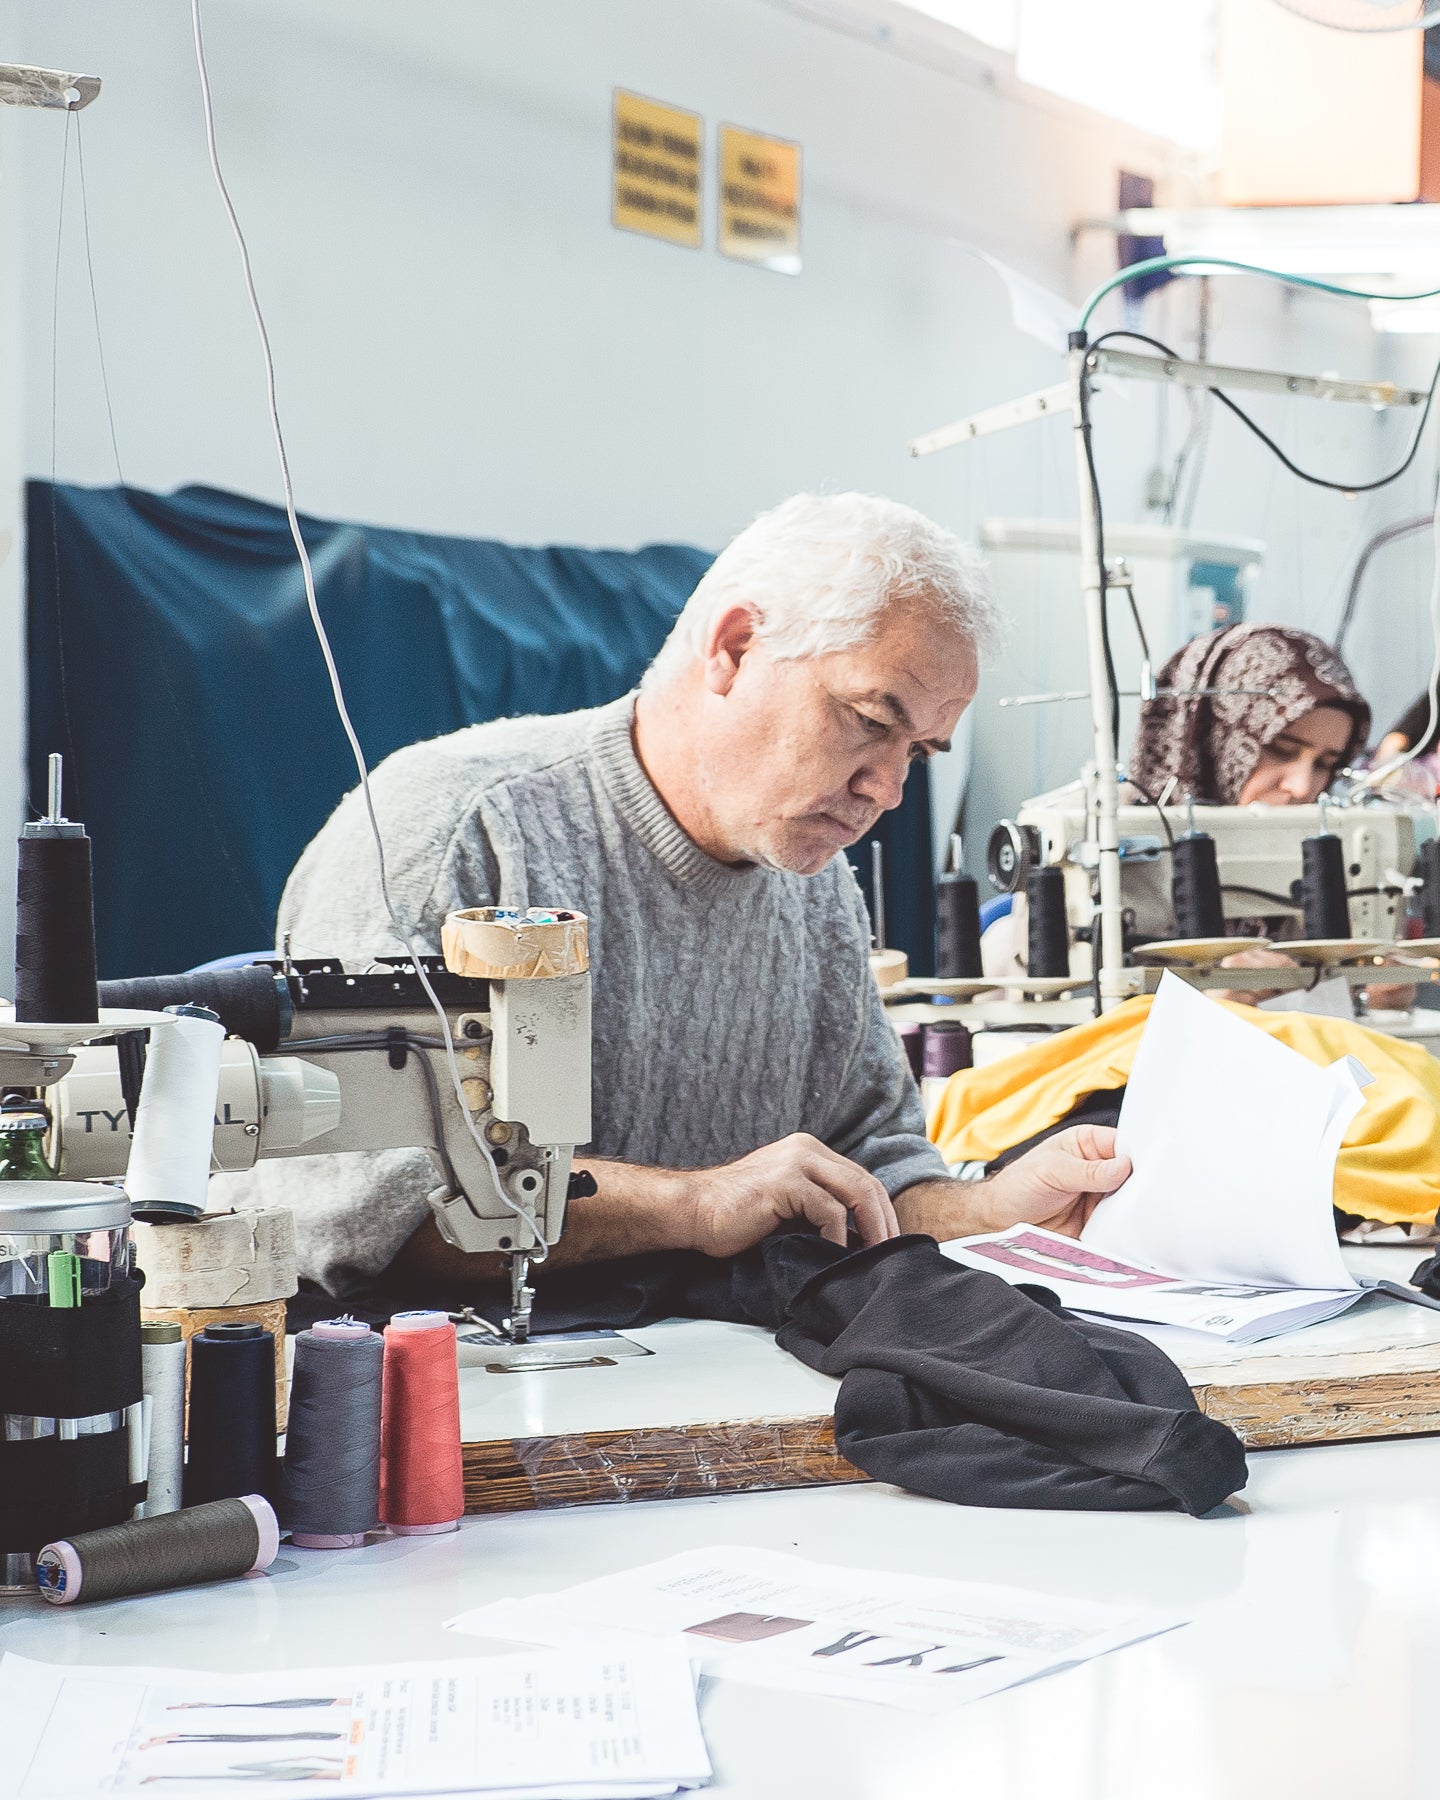 Man wearing jumper working on clothes